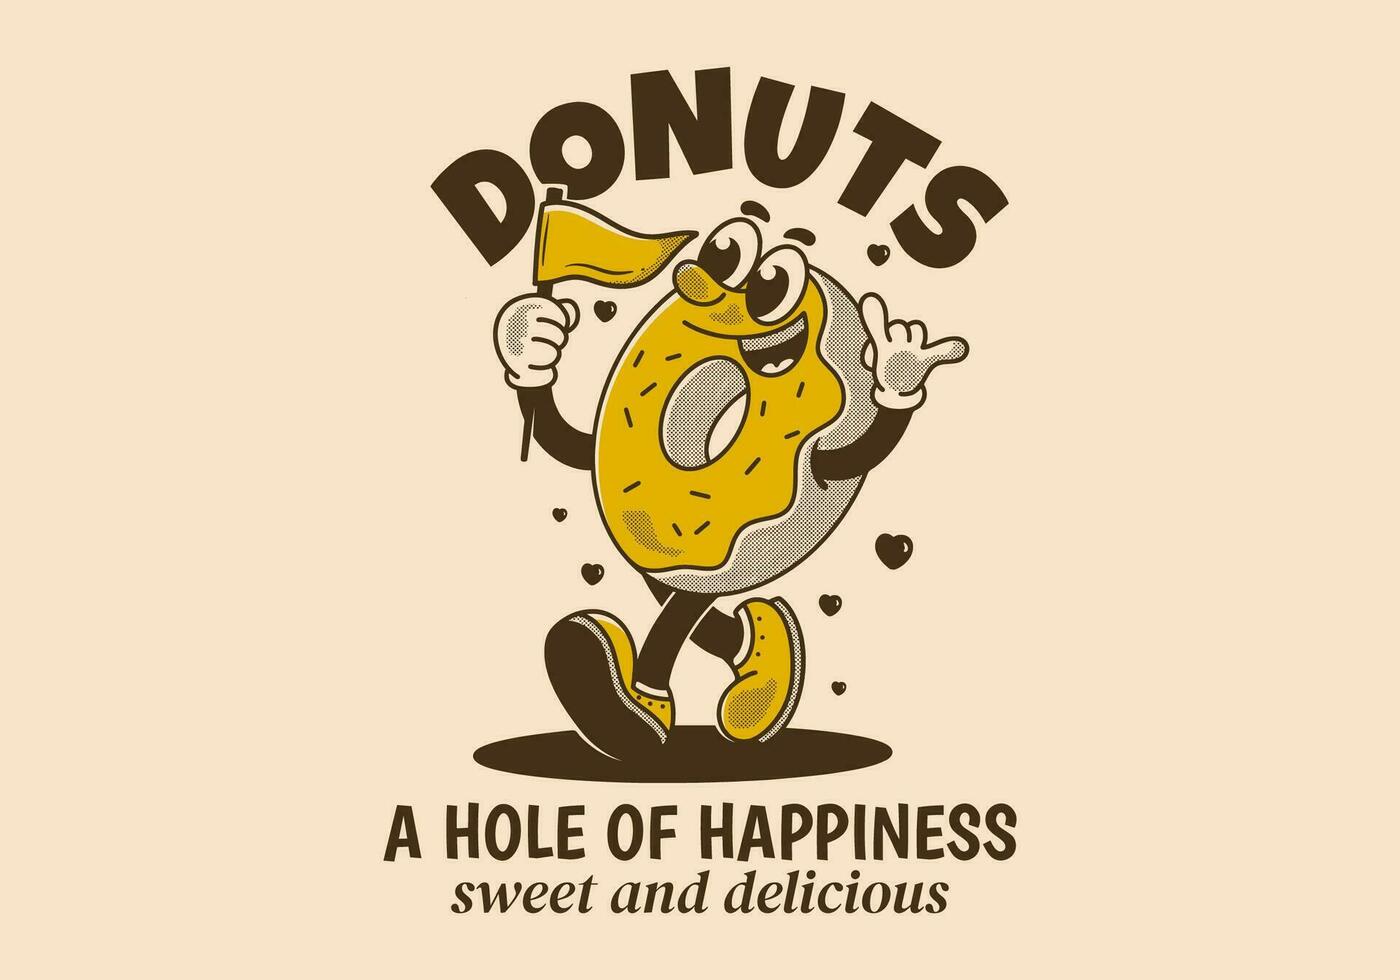 Donuts, a hole of happiness. Mascot character illustration of walking donuts holding a flag vector